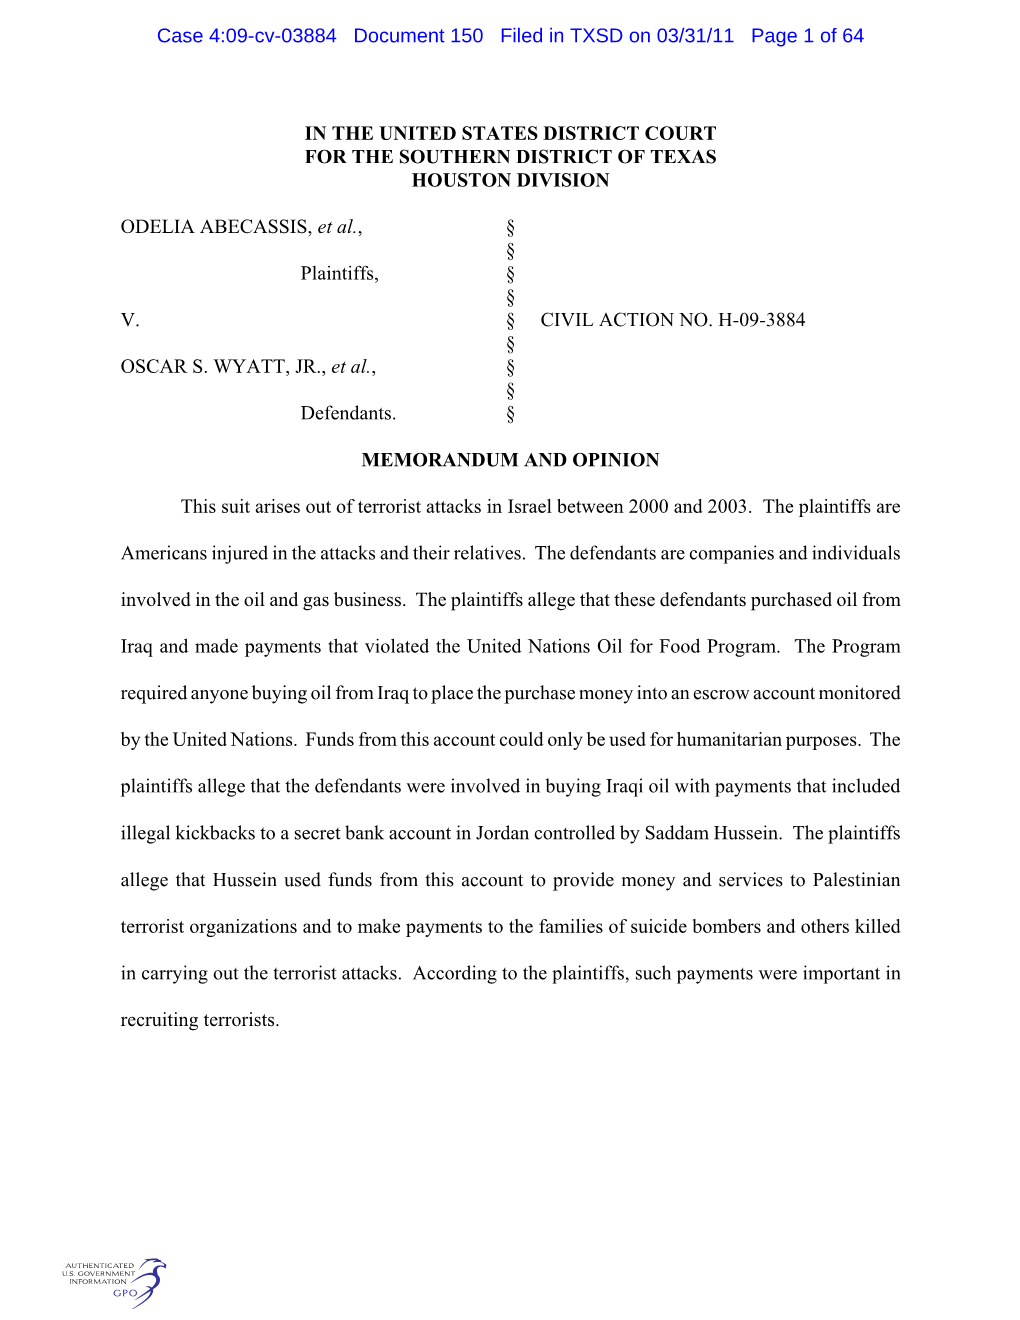 Case 4:09-Cv-03884 Document 150 Filed in TXSD on 03/31/11 Page 1 of 64